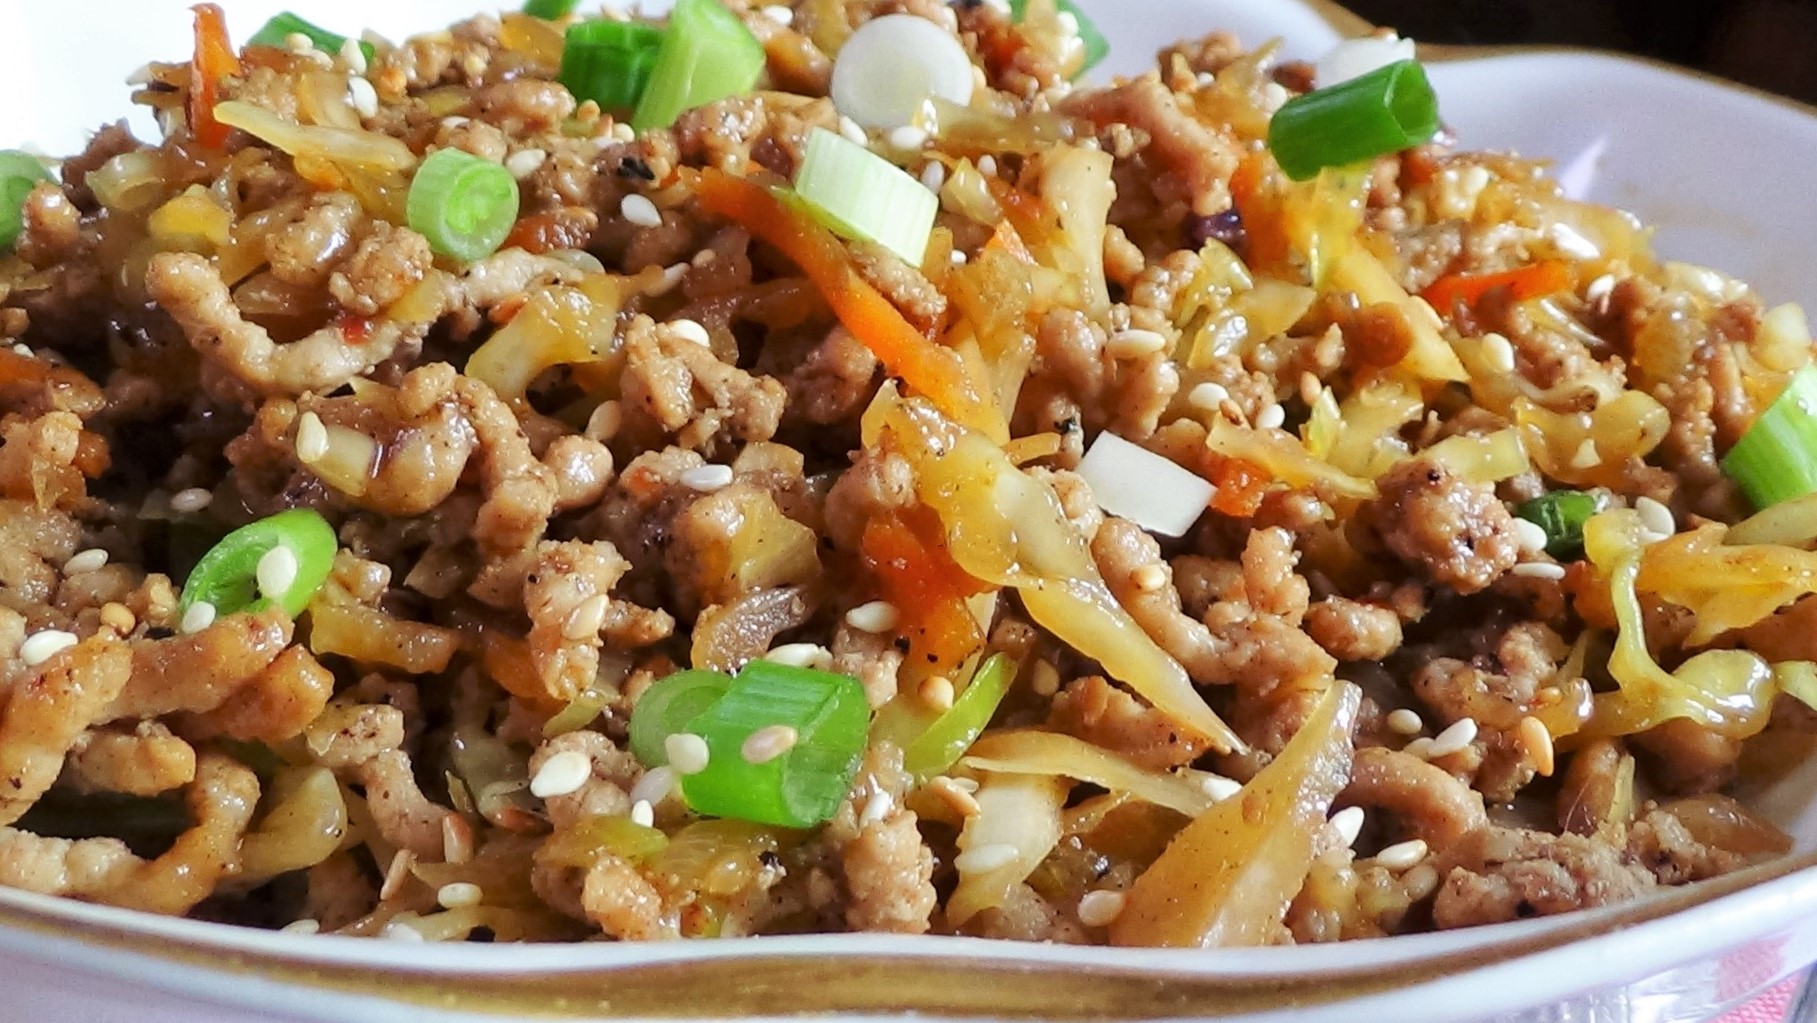 Egg Roll in a Bowl